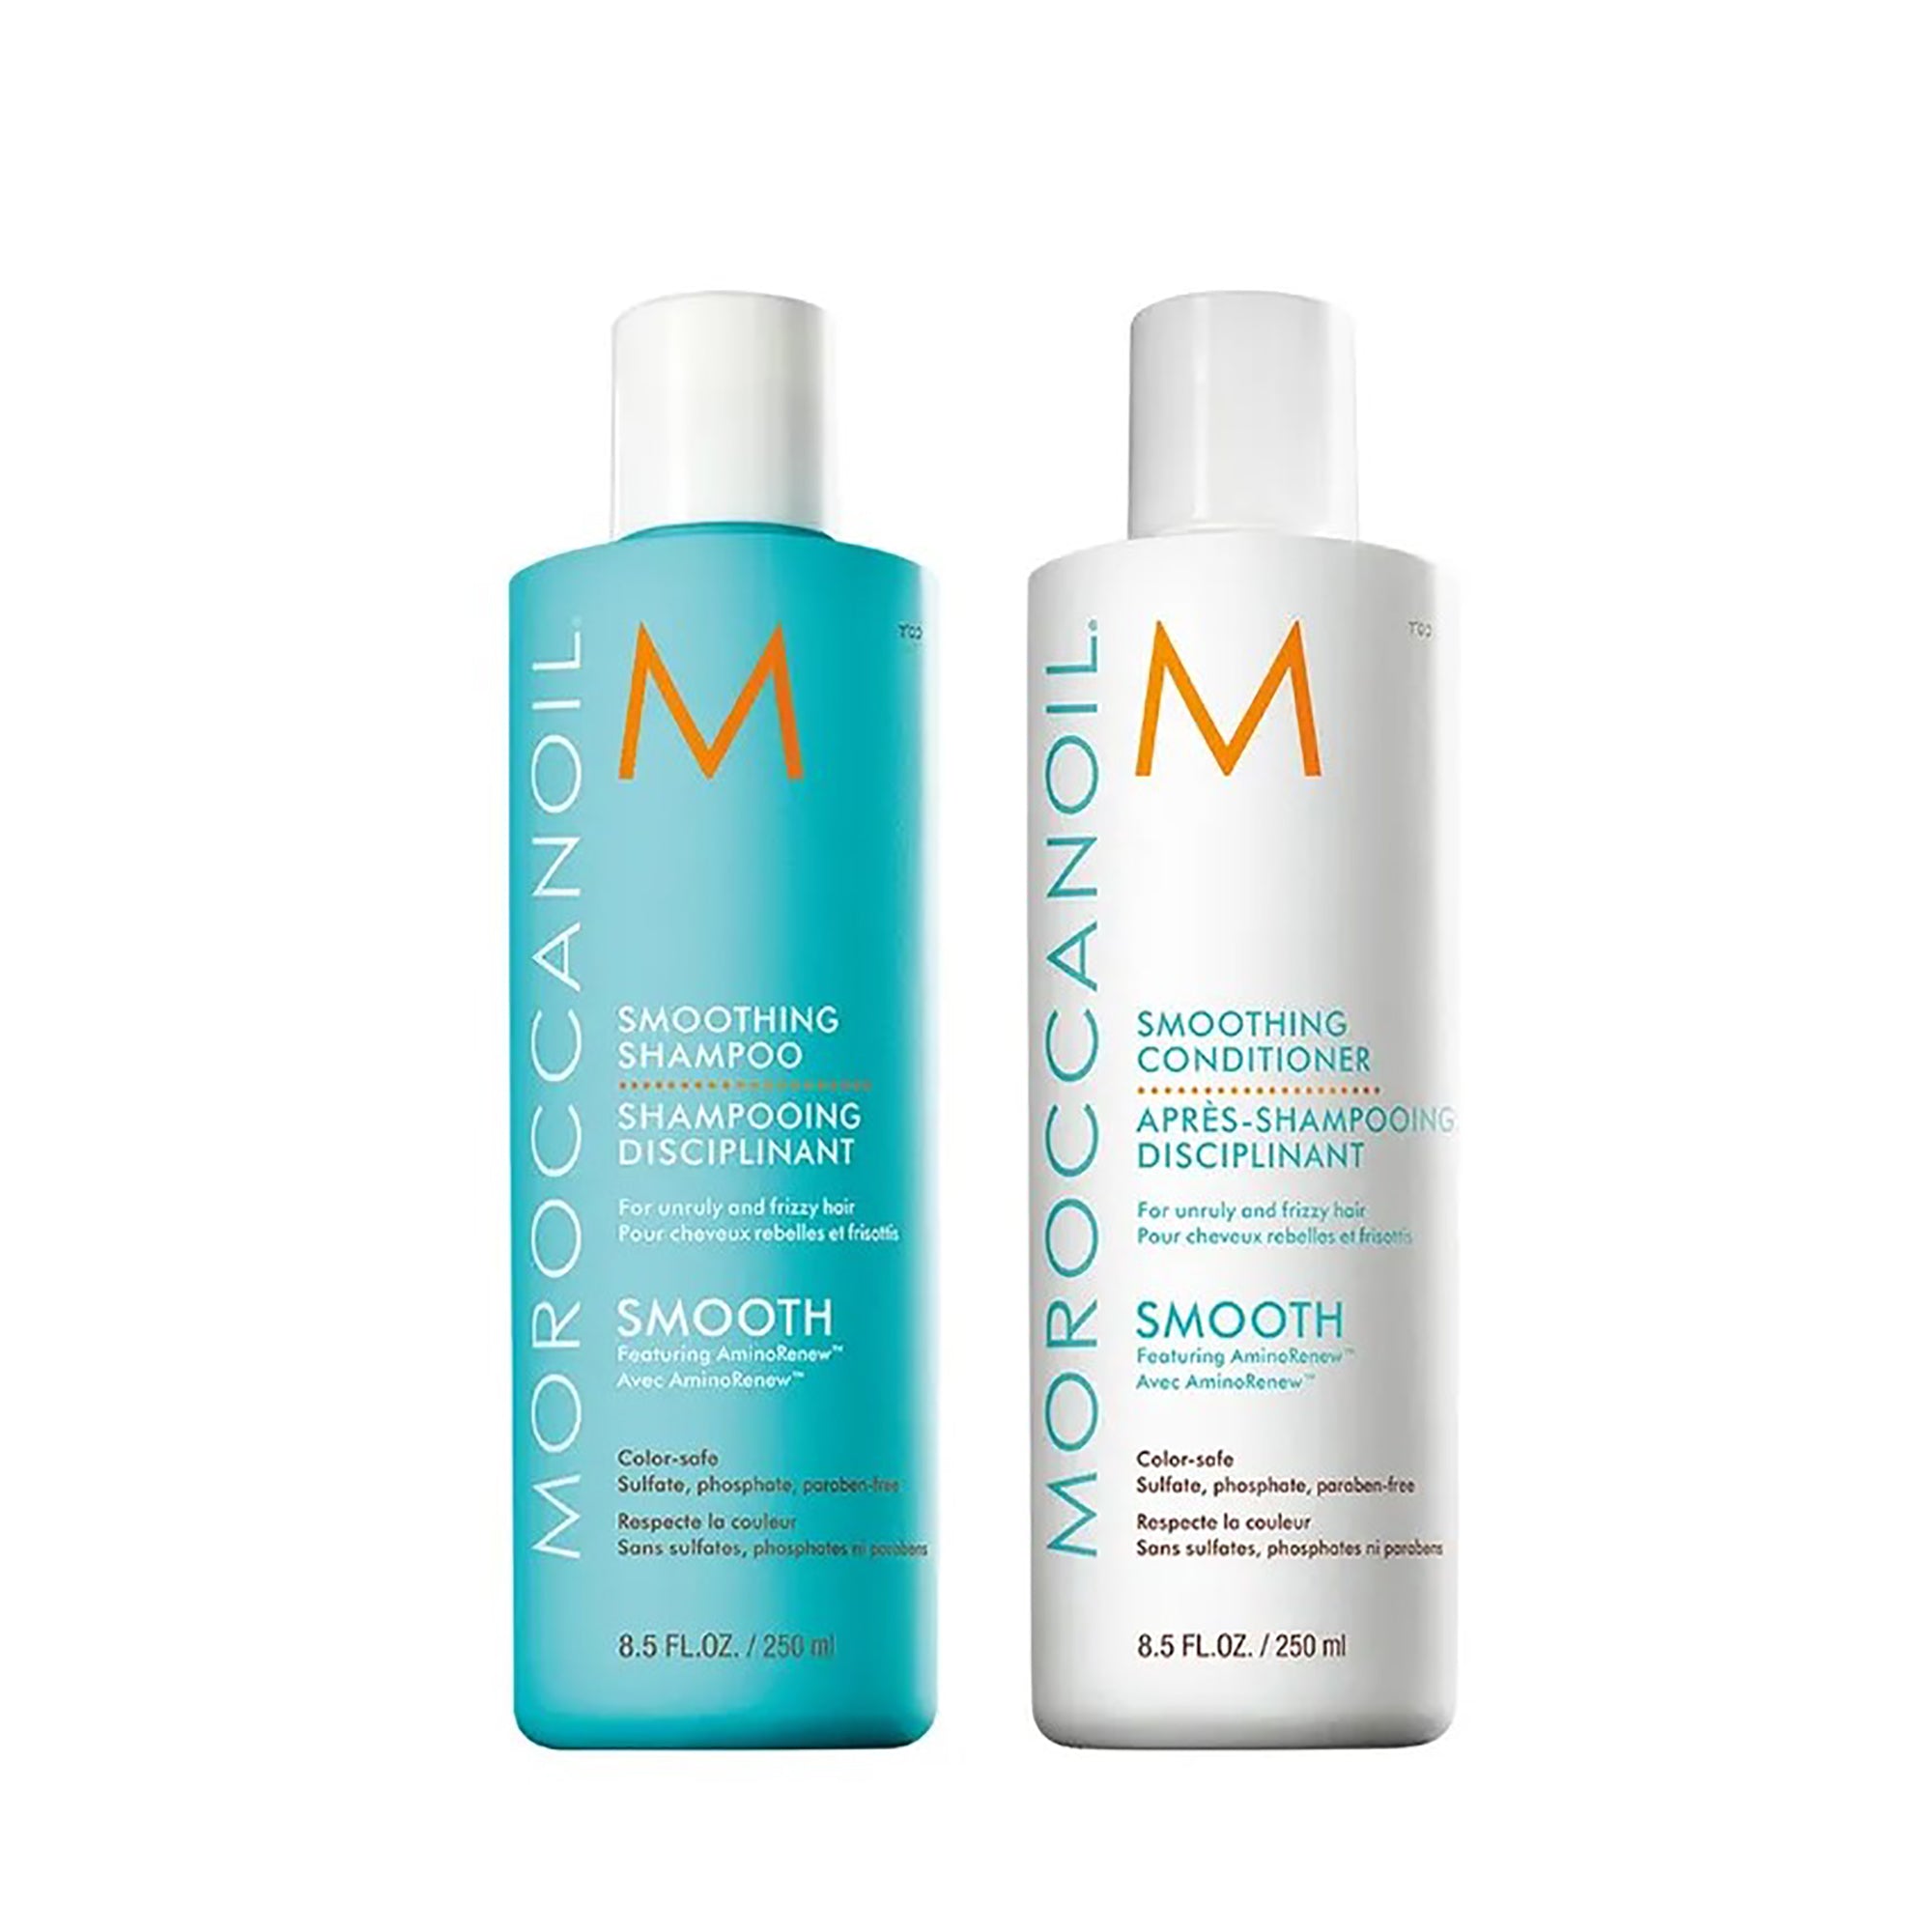 MoroccanOil Smoothing Shampoo and Conditioner 8oz - Planet Beauty